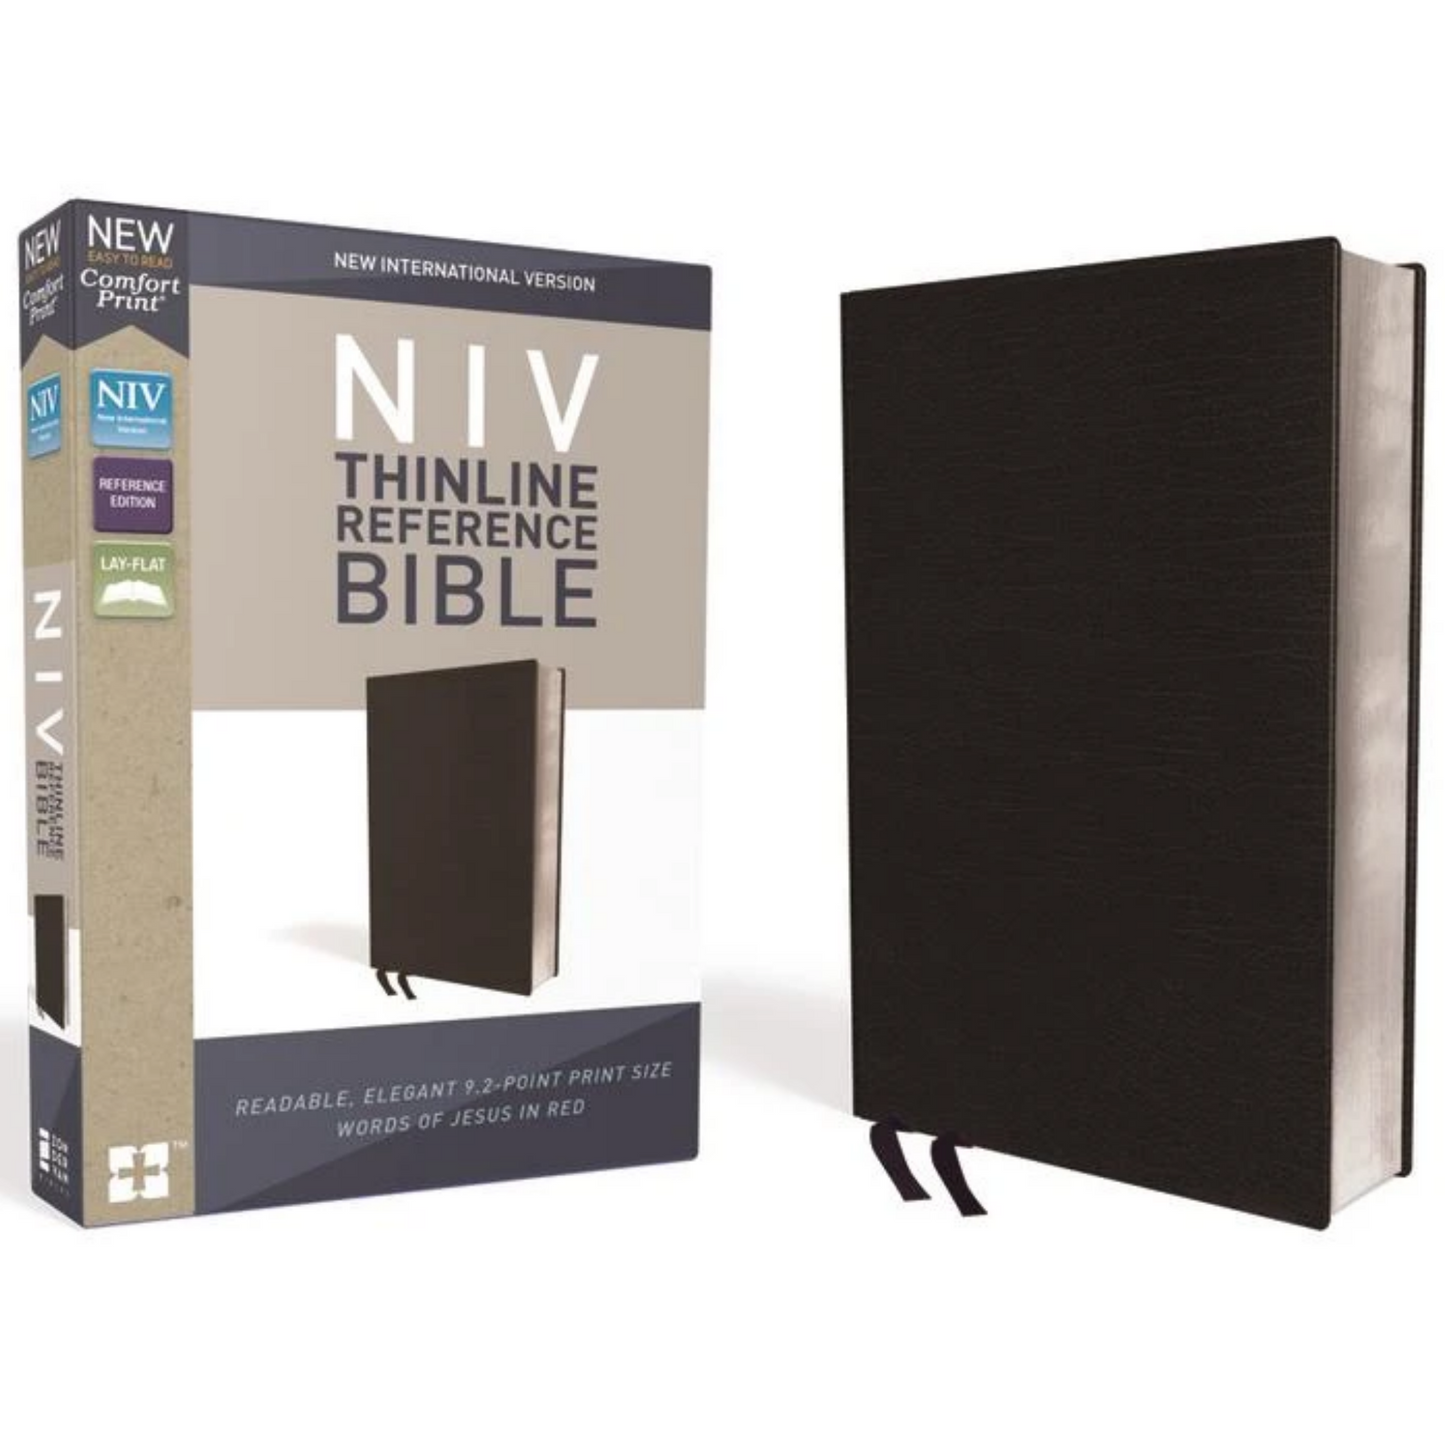 NIV Thinline Ref Bible, Bonded Leather